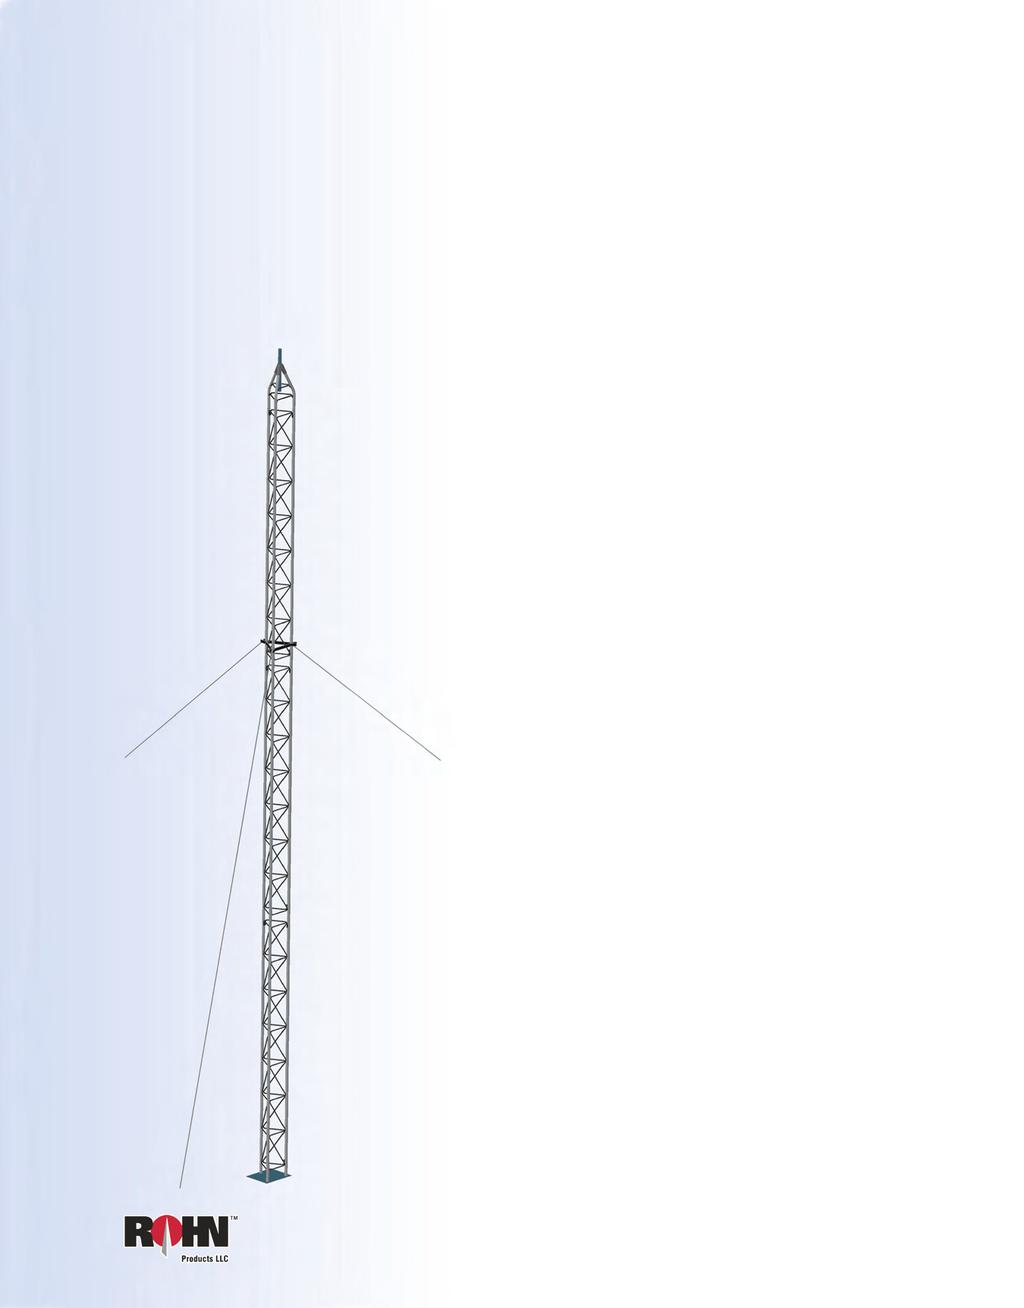 G GUYED TOWERS 25G STANDARD 25G GUYED TOWER ROHN 25G The first. The original. includes REV. F & REV.